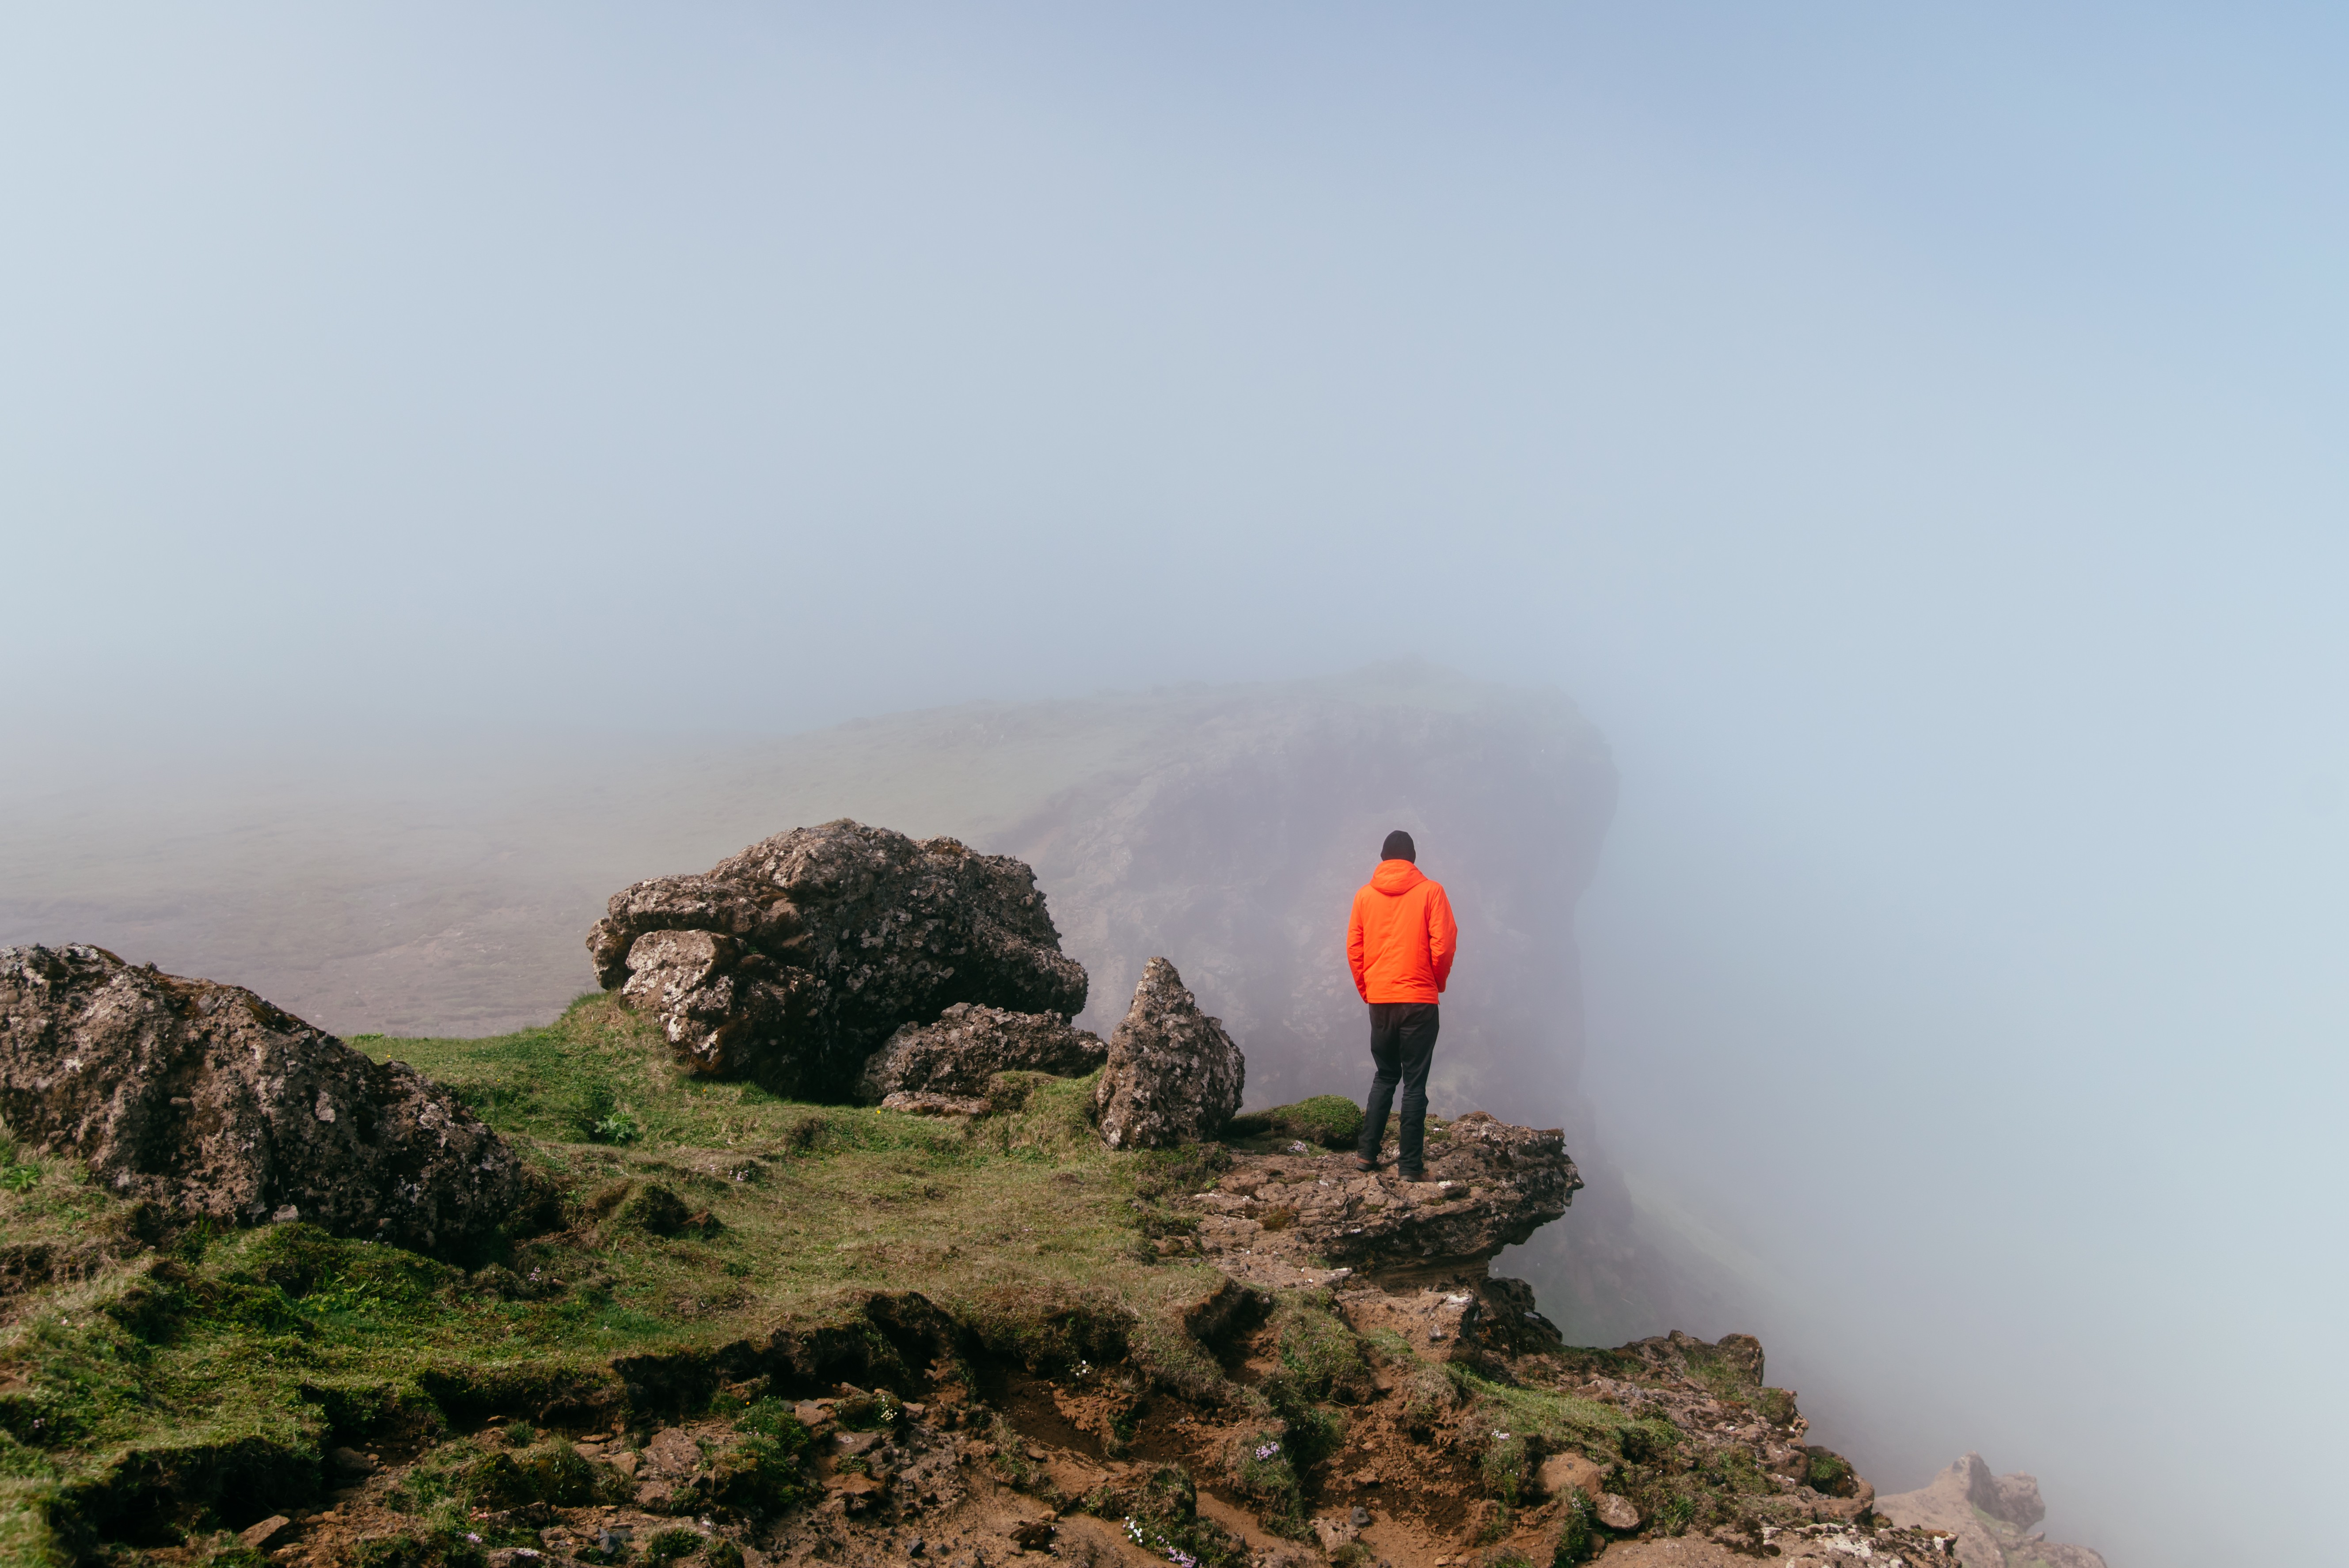 General 5316x3549 photography effects alone outdoors rocks mist cliff orange jacket